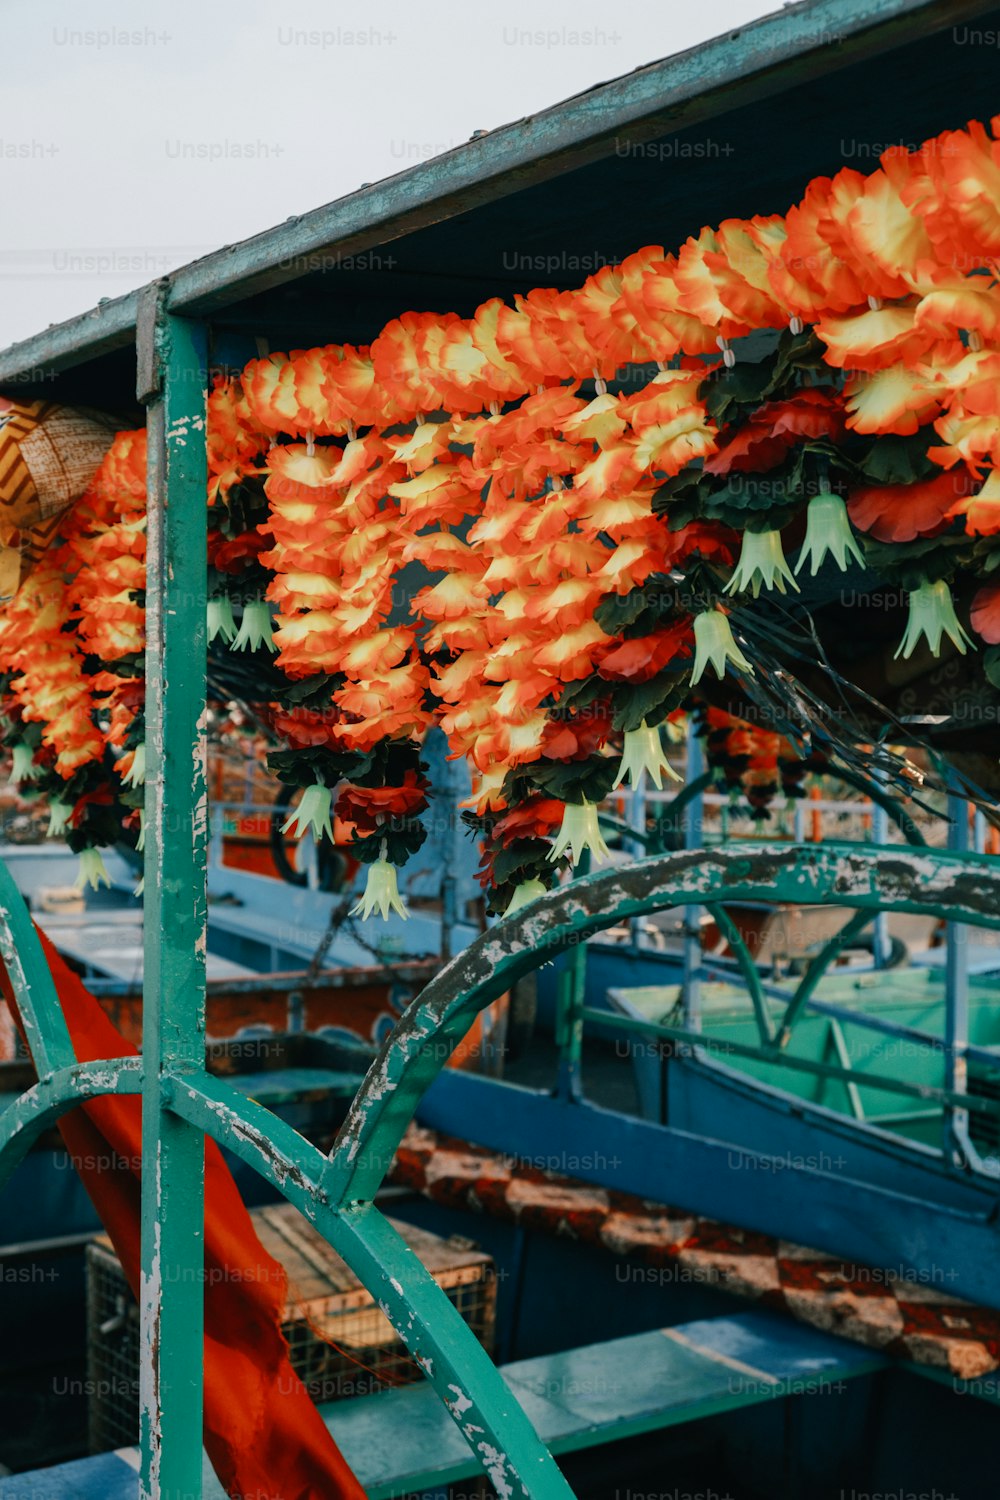 a bunch of orange flowers hanging from a metal structure